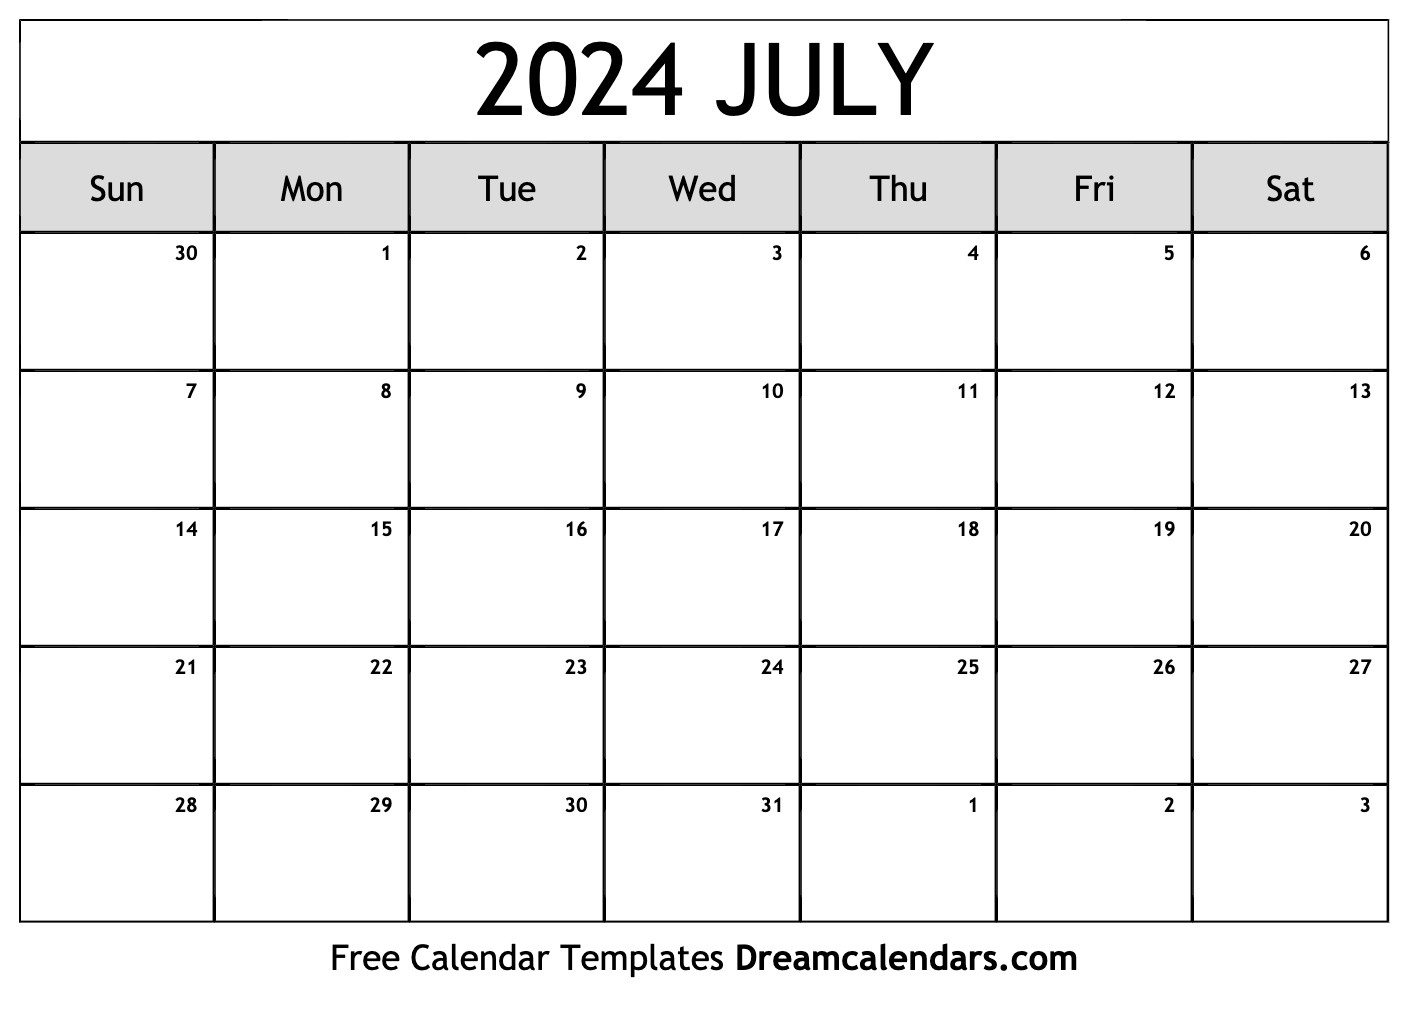 July 2024 Calendar - Free Printable With Holidays And Observances with regard to July 14 2024 Calendar